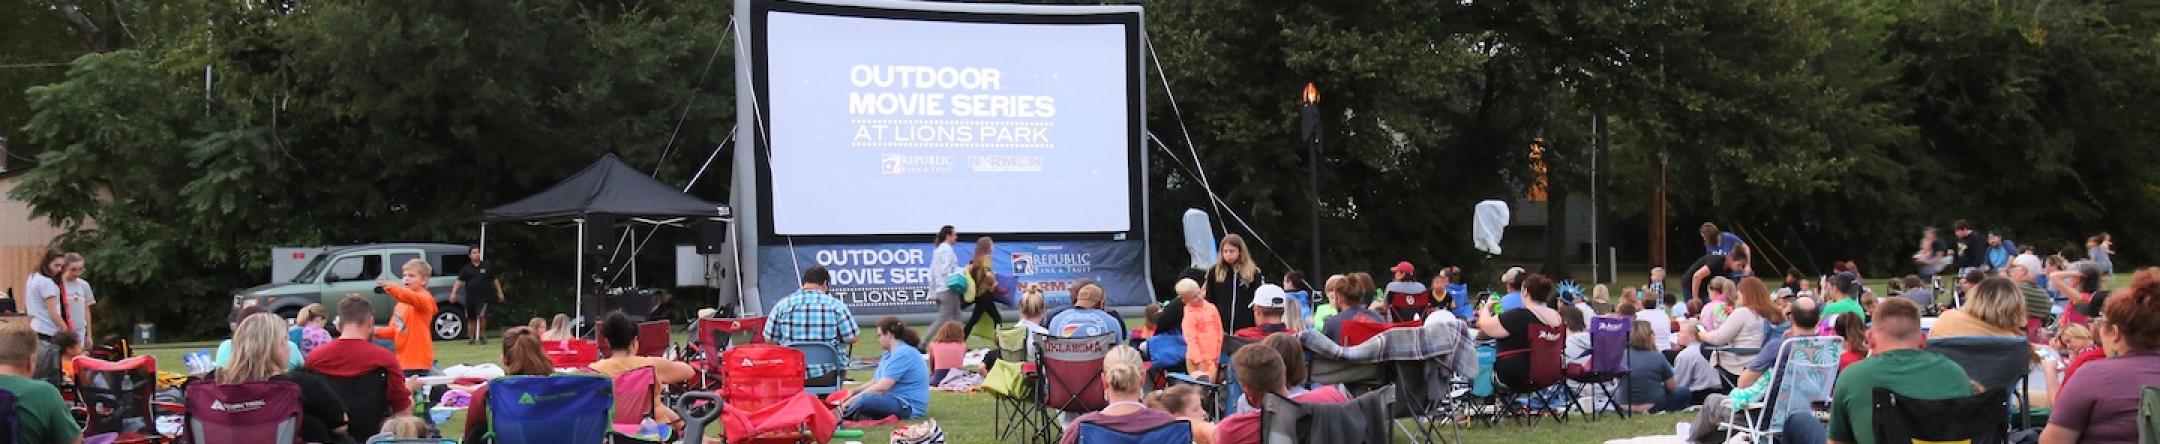 Group Gathering for a Movie in a Park